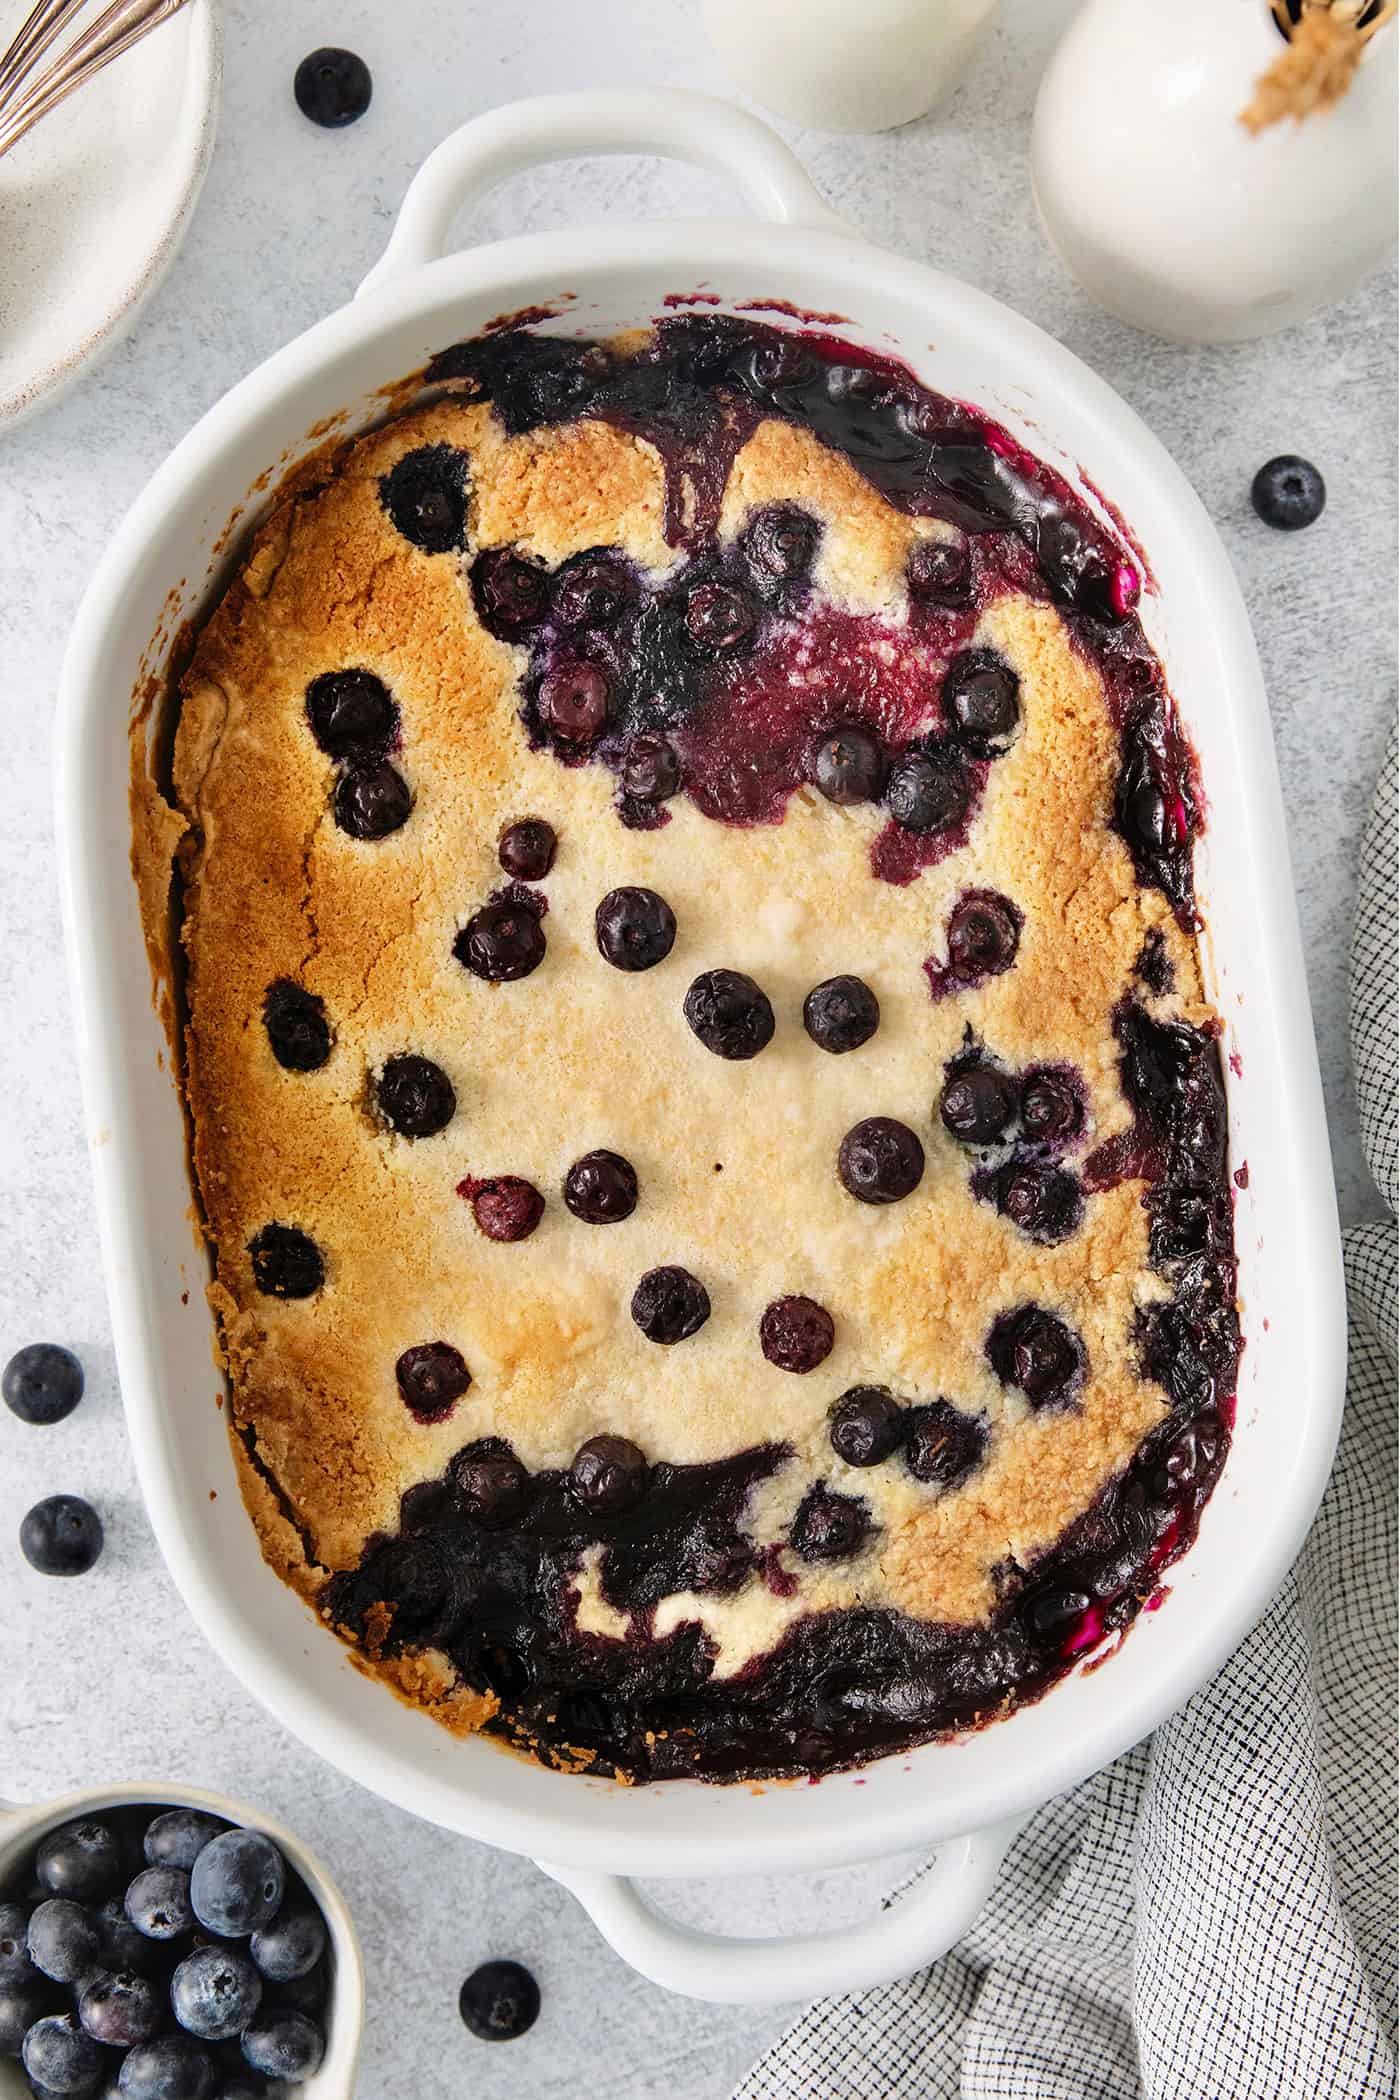 Blueberry dump cake in a white baking dish.